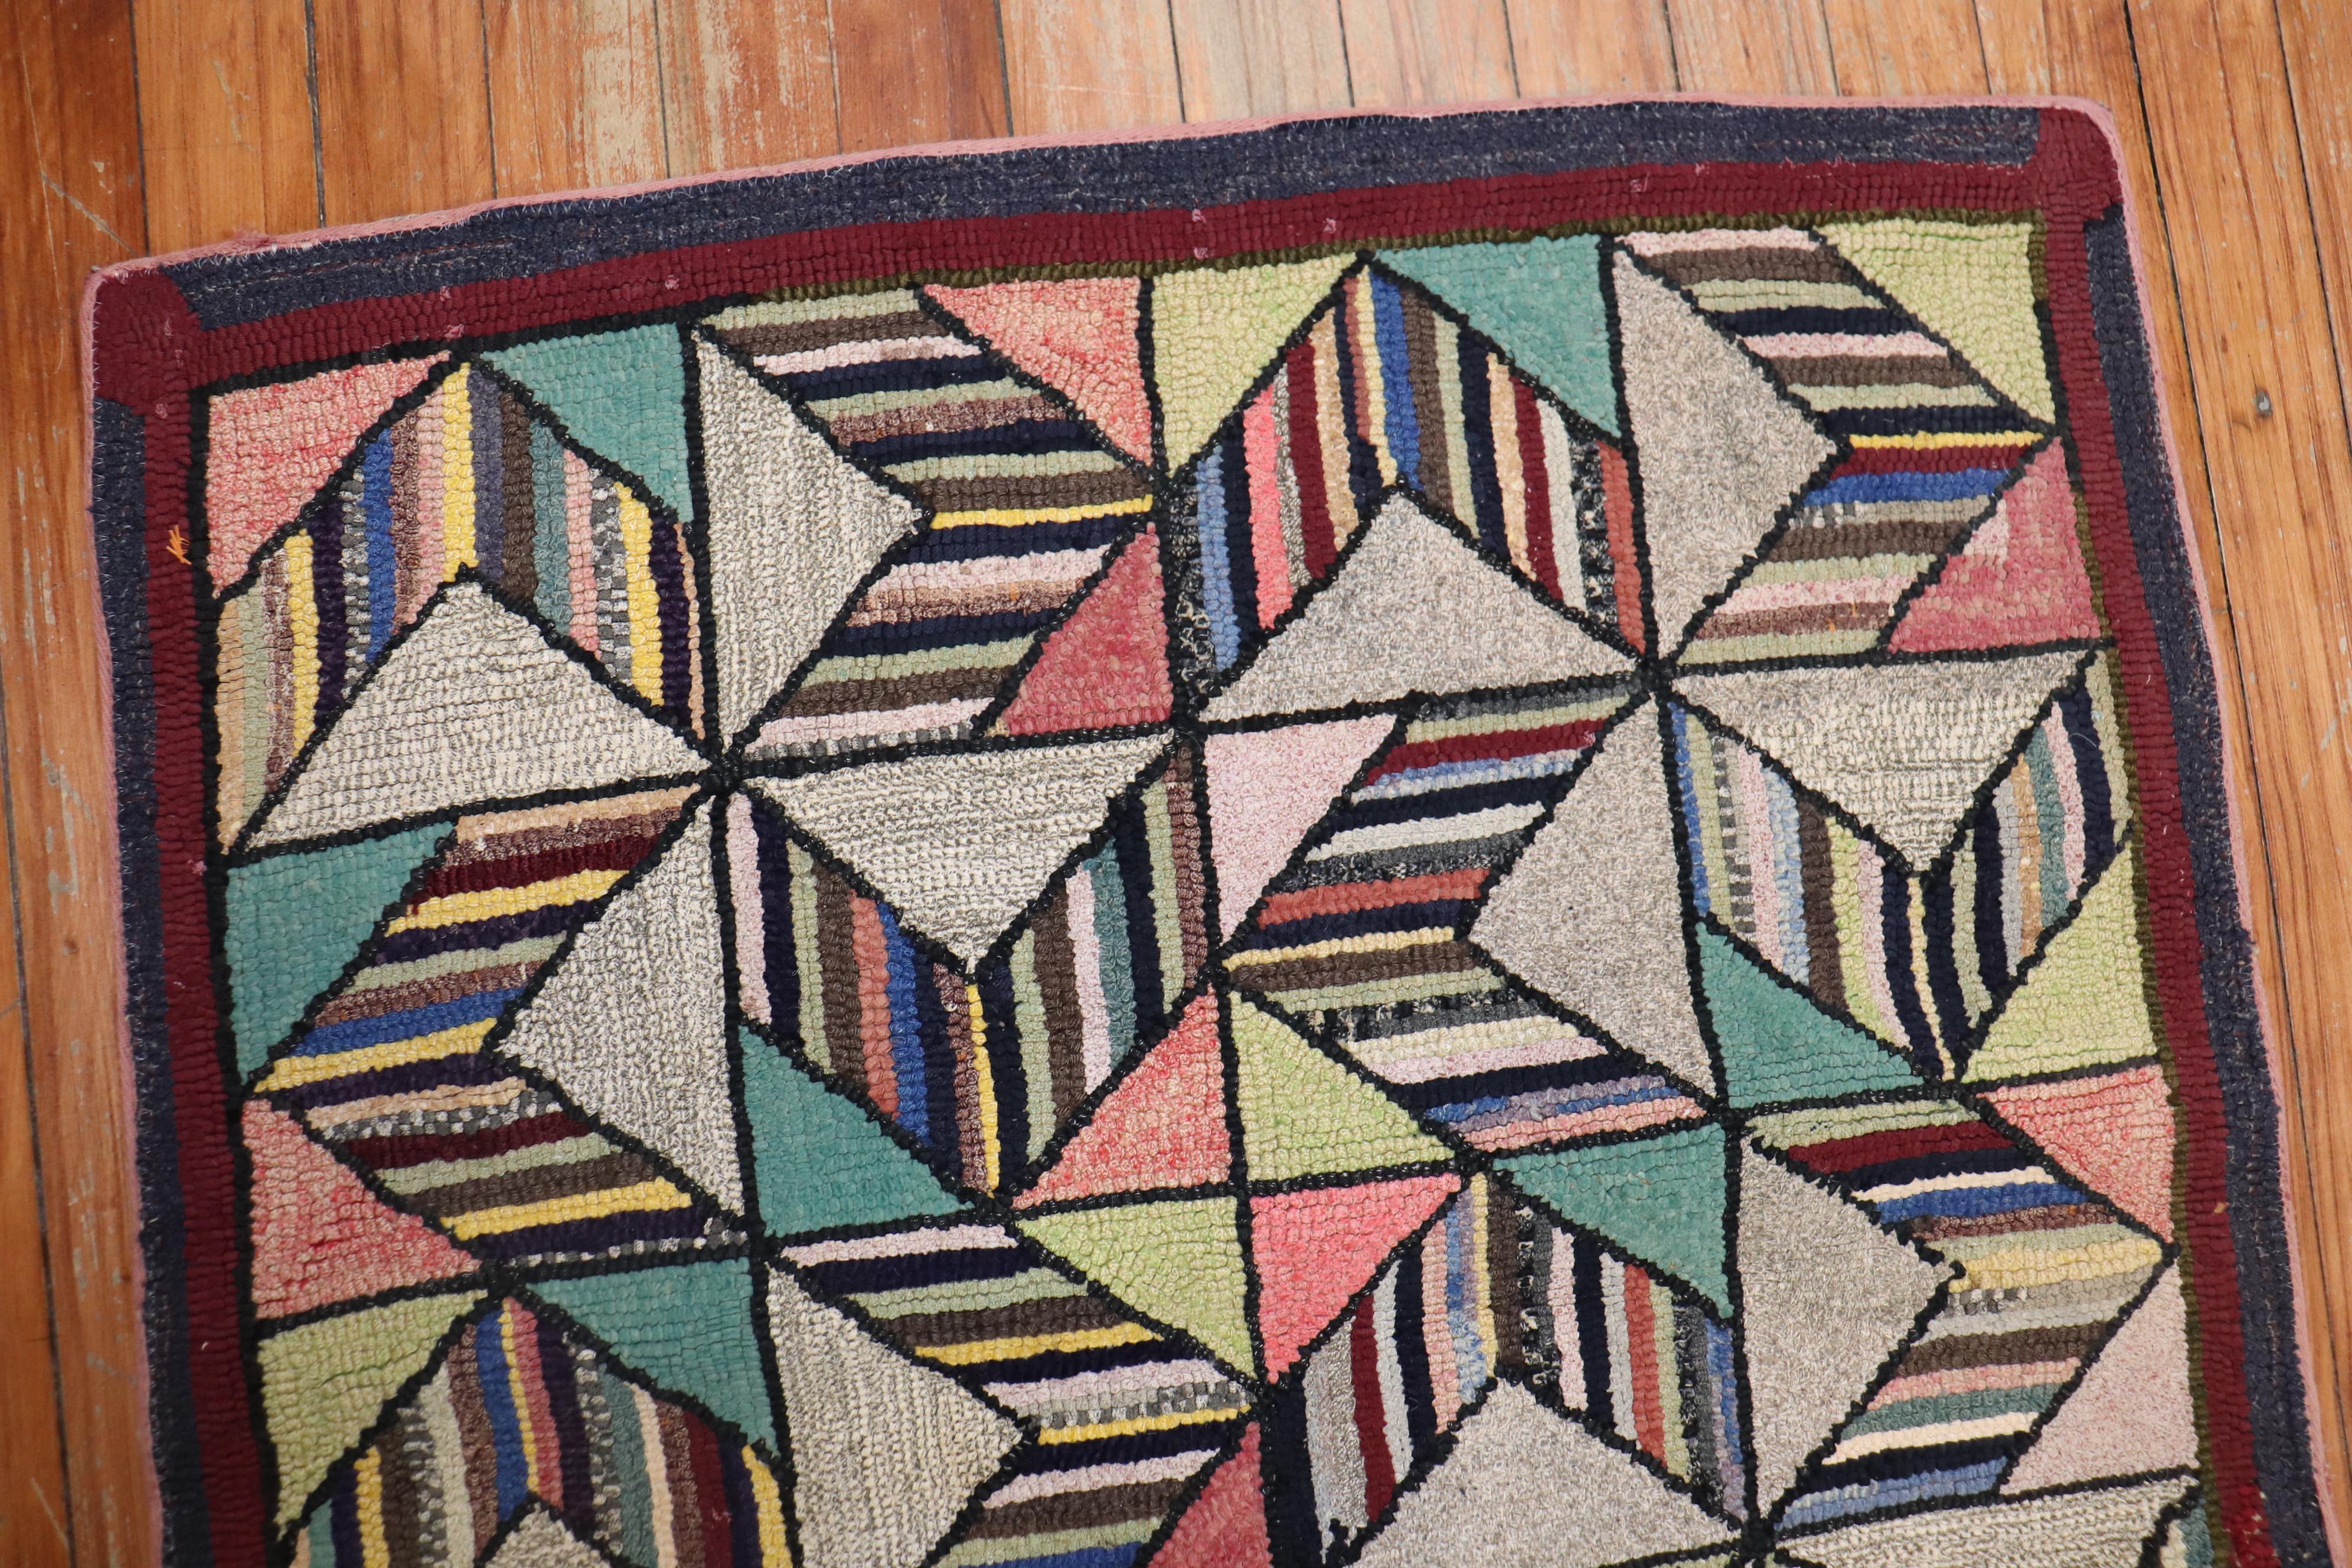 A handmade decorative American hooked rug from the middle of the 20th century with a dizzy-like geometric design

Measures: 2'4